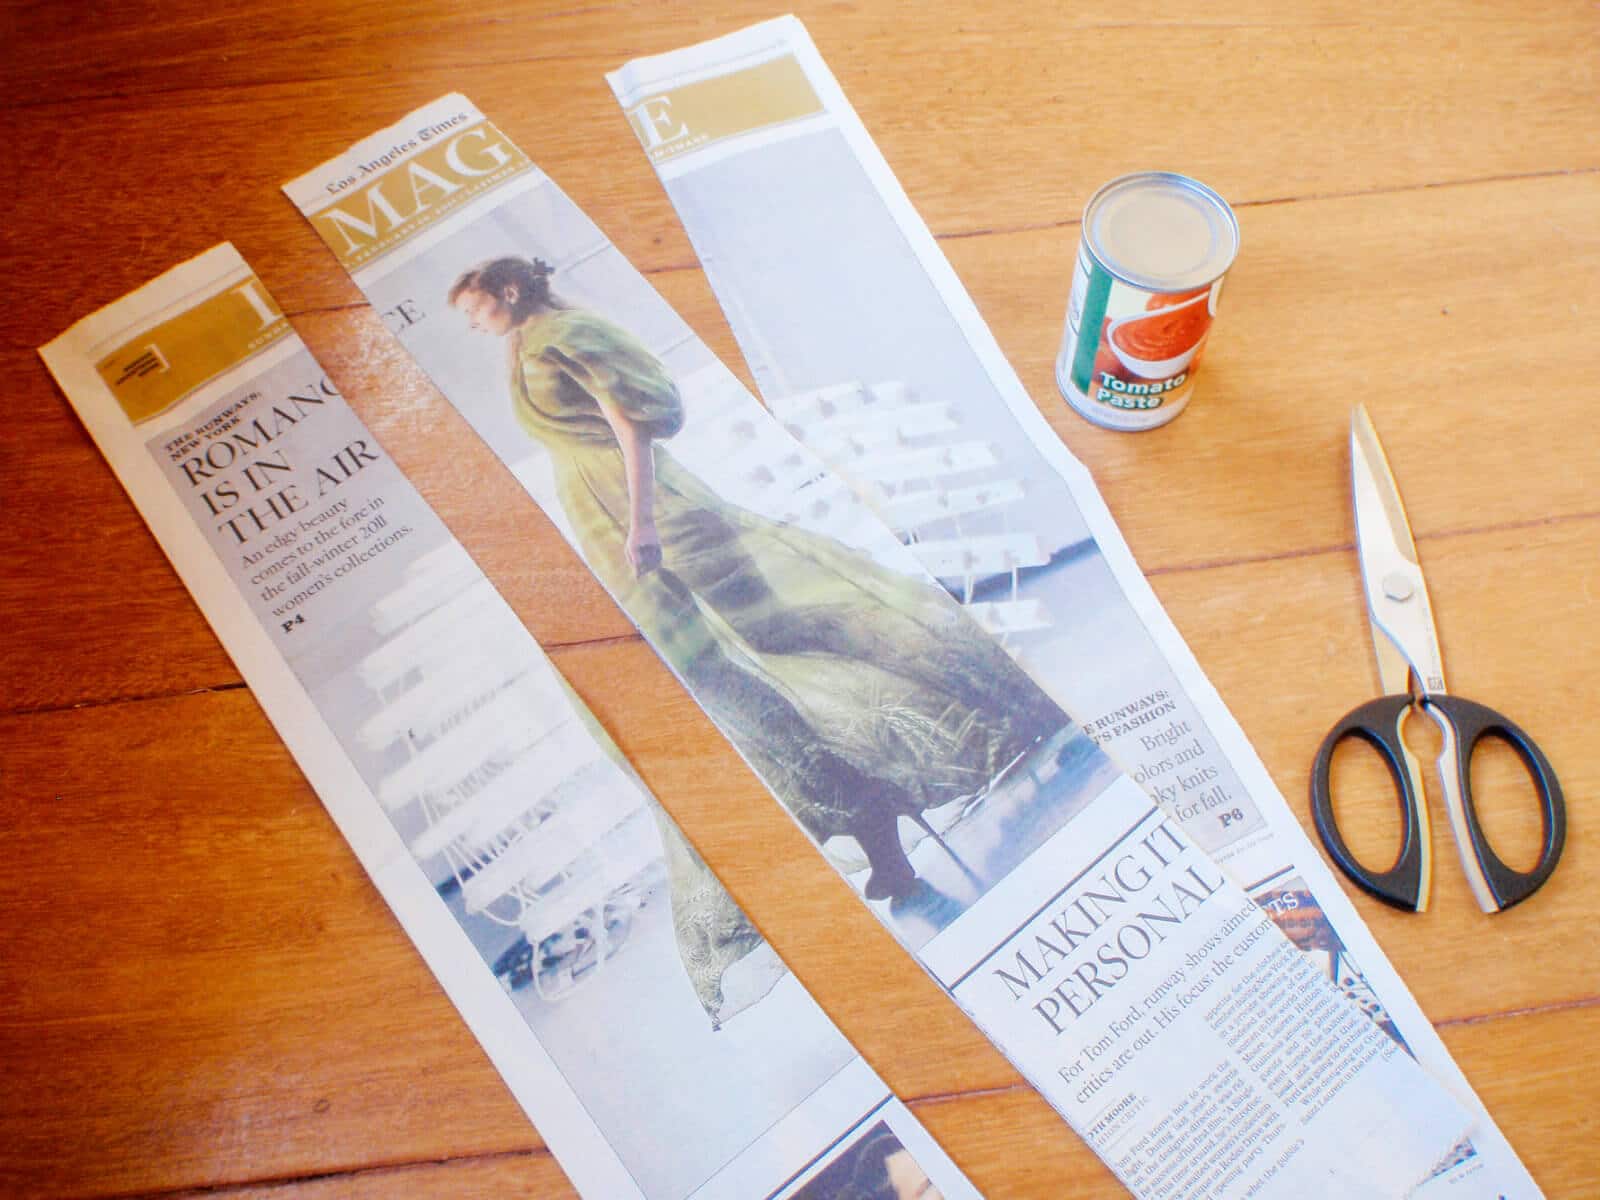 Cut the newspaper into thirds lengthwise